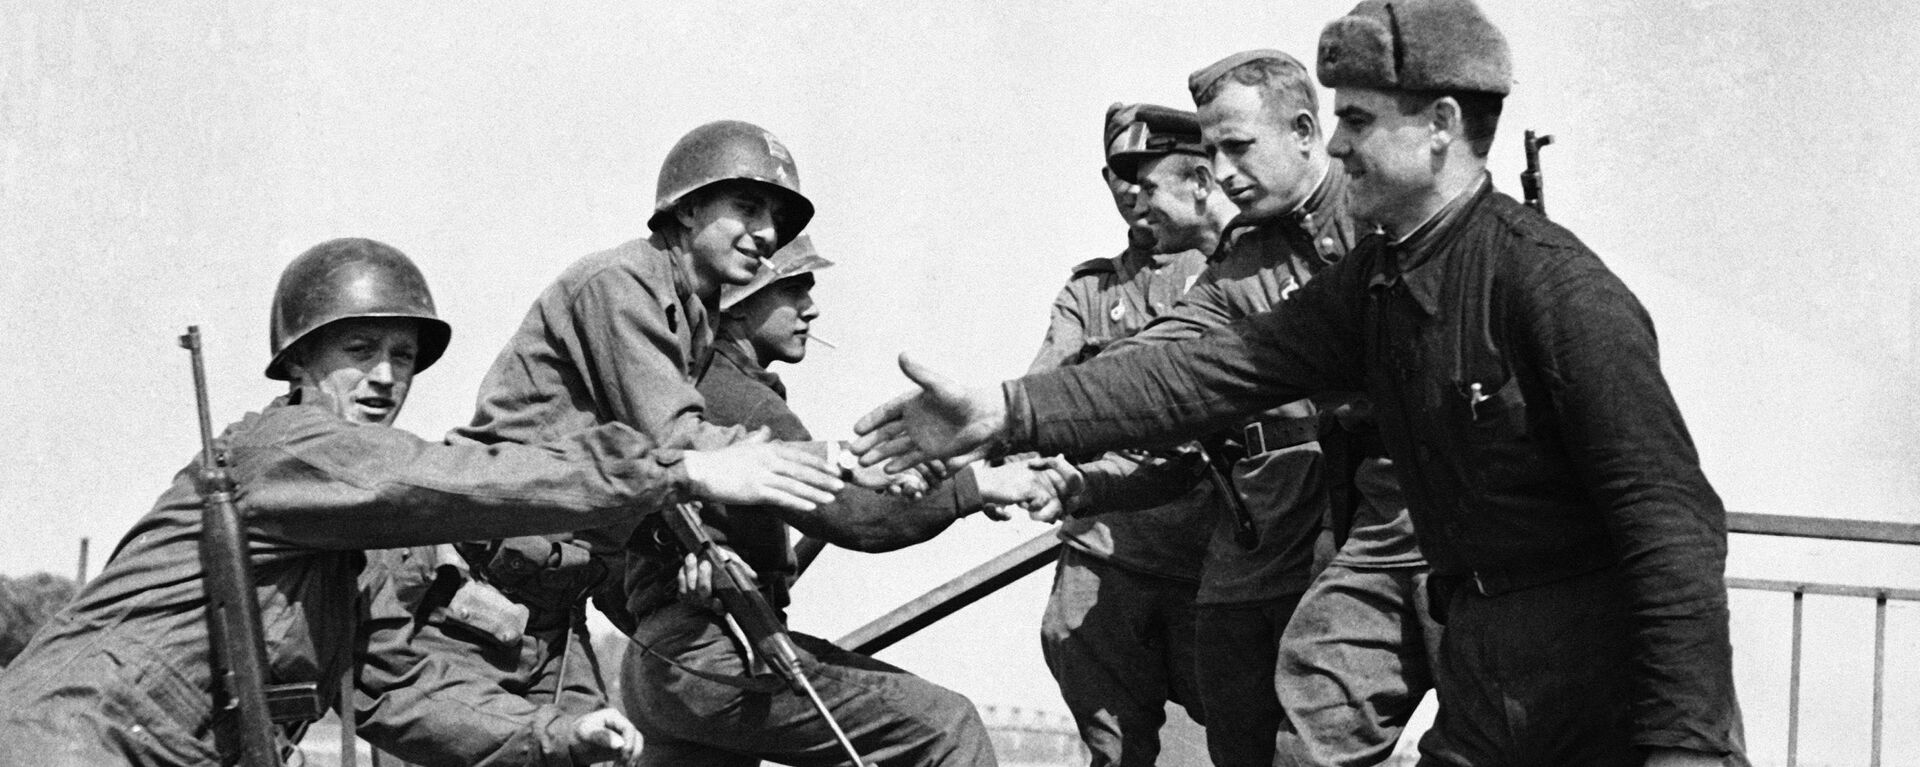 US and Soviet troops shaking hands after meeting up at Torgau on the Elbe river in Germany on 26 April 1945 - Sputnik International, 1920, 09.05.2023